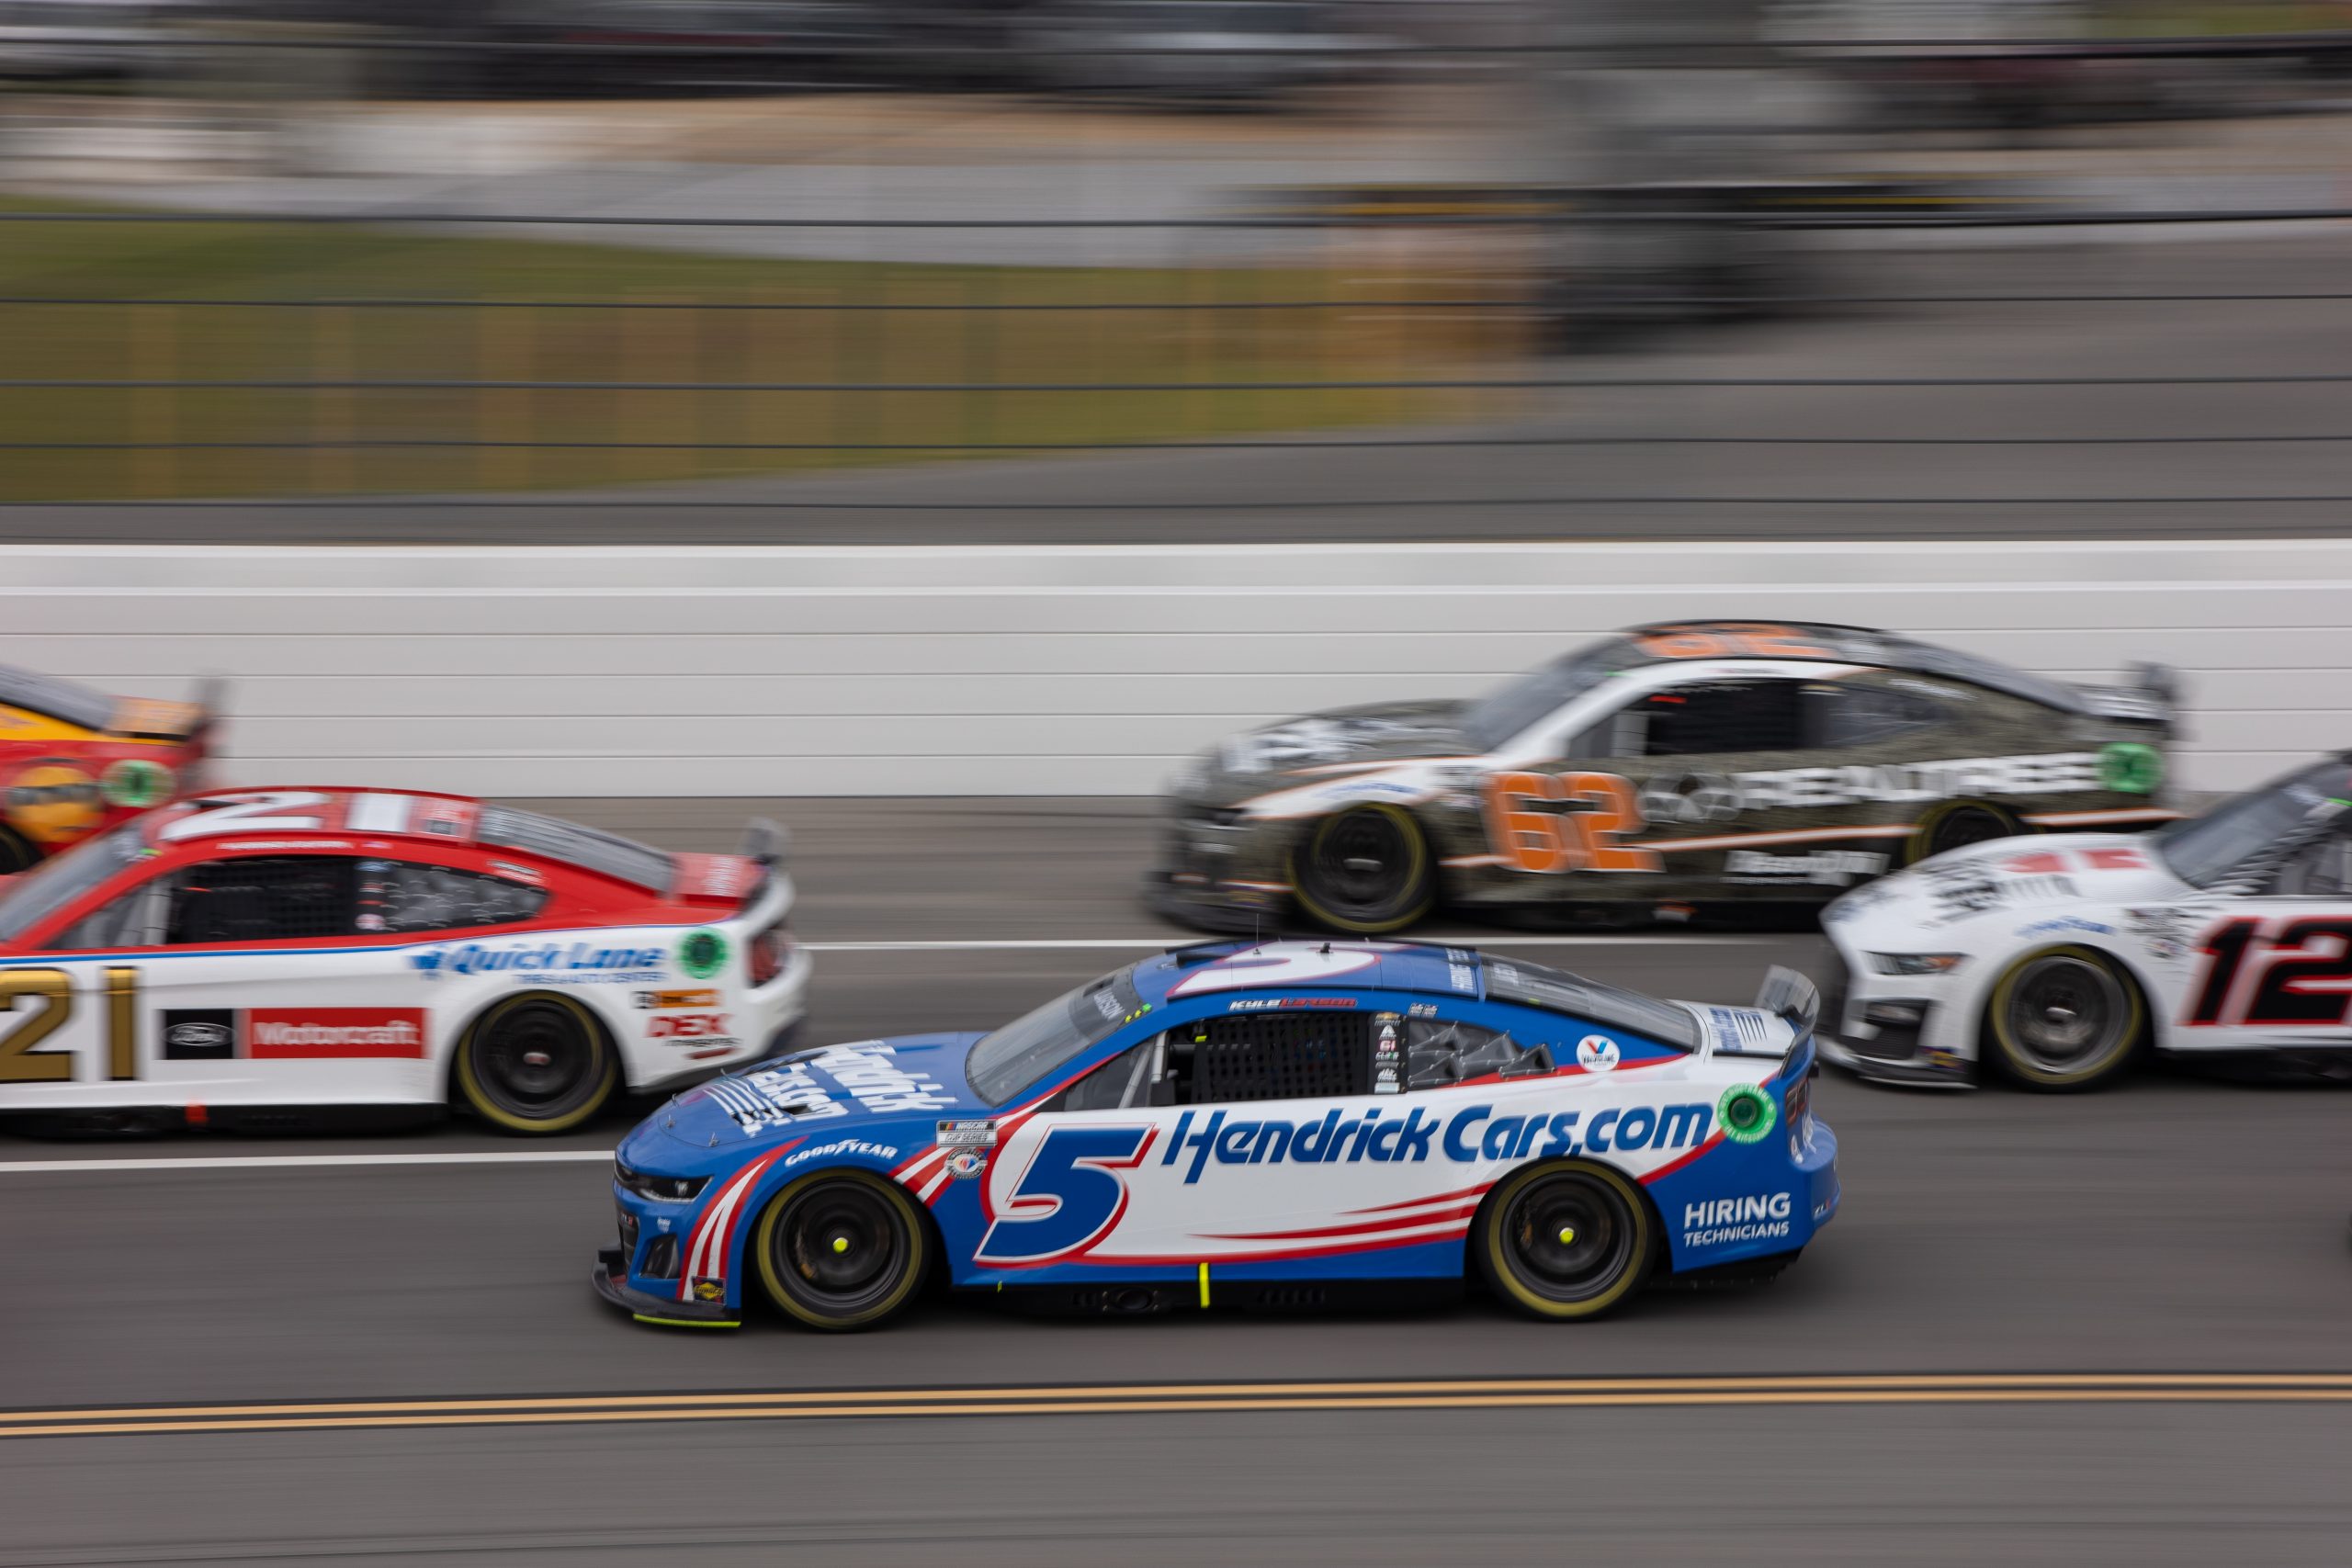 Larson was in the mix during Stages 1 and 3, biding his time before a Turn 2 crash on Lap 190 eliminated him from contention. (Photo: Riley Thompson | The Podium Finish)